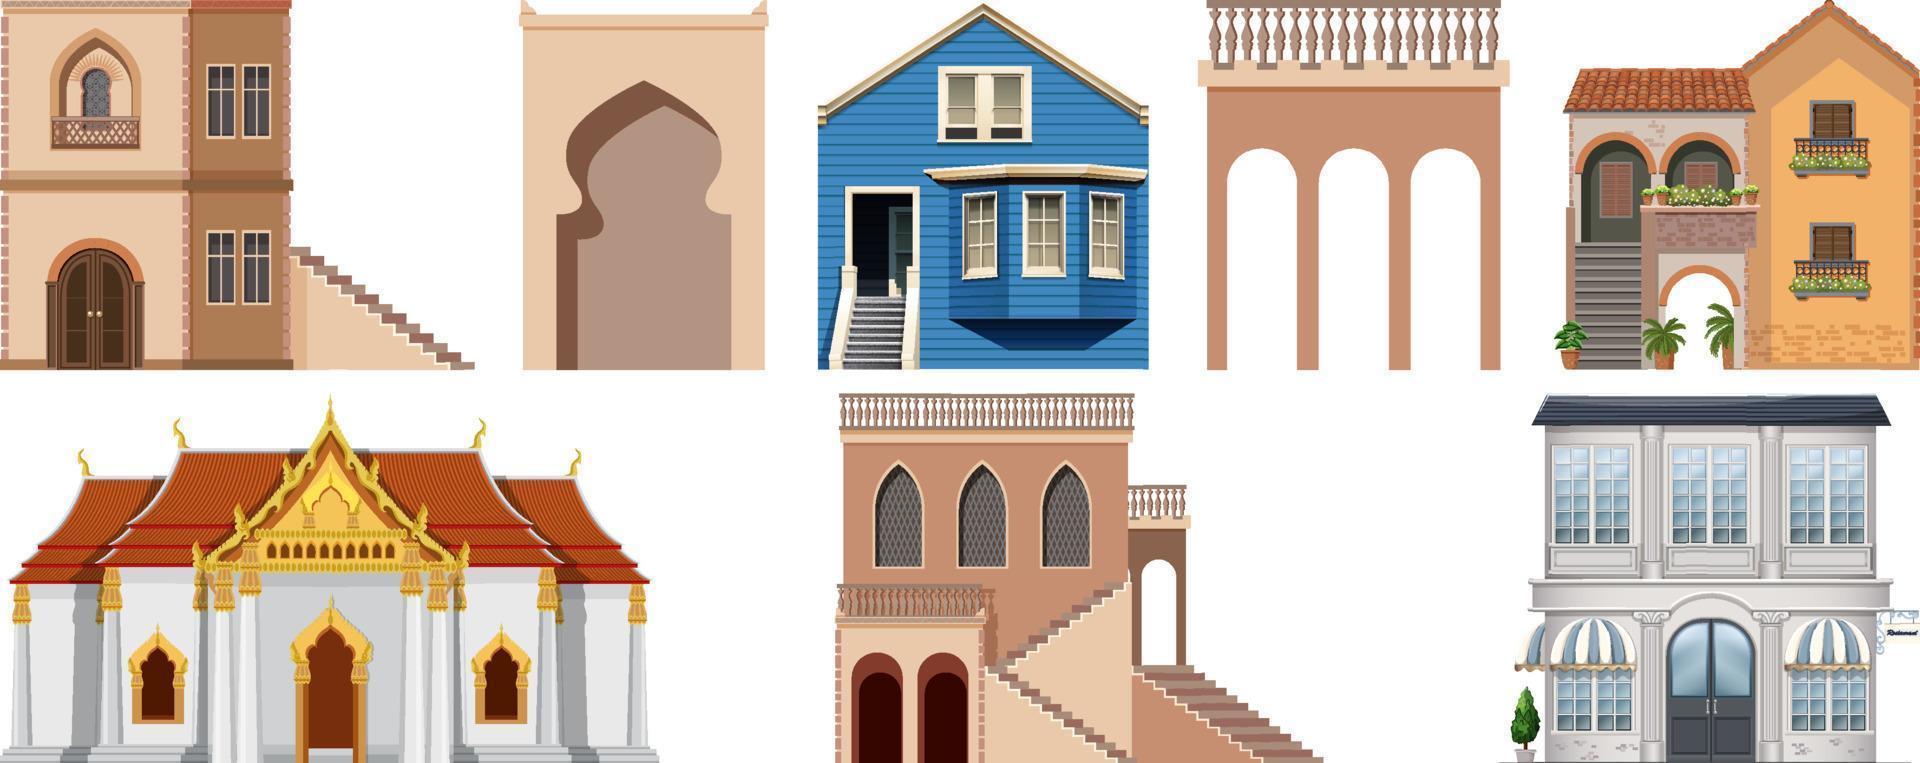 Different designs of buildings on white background vector